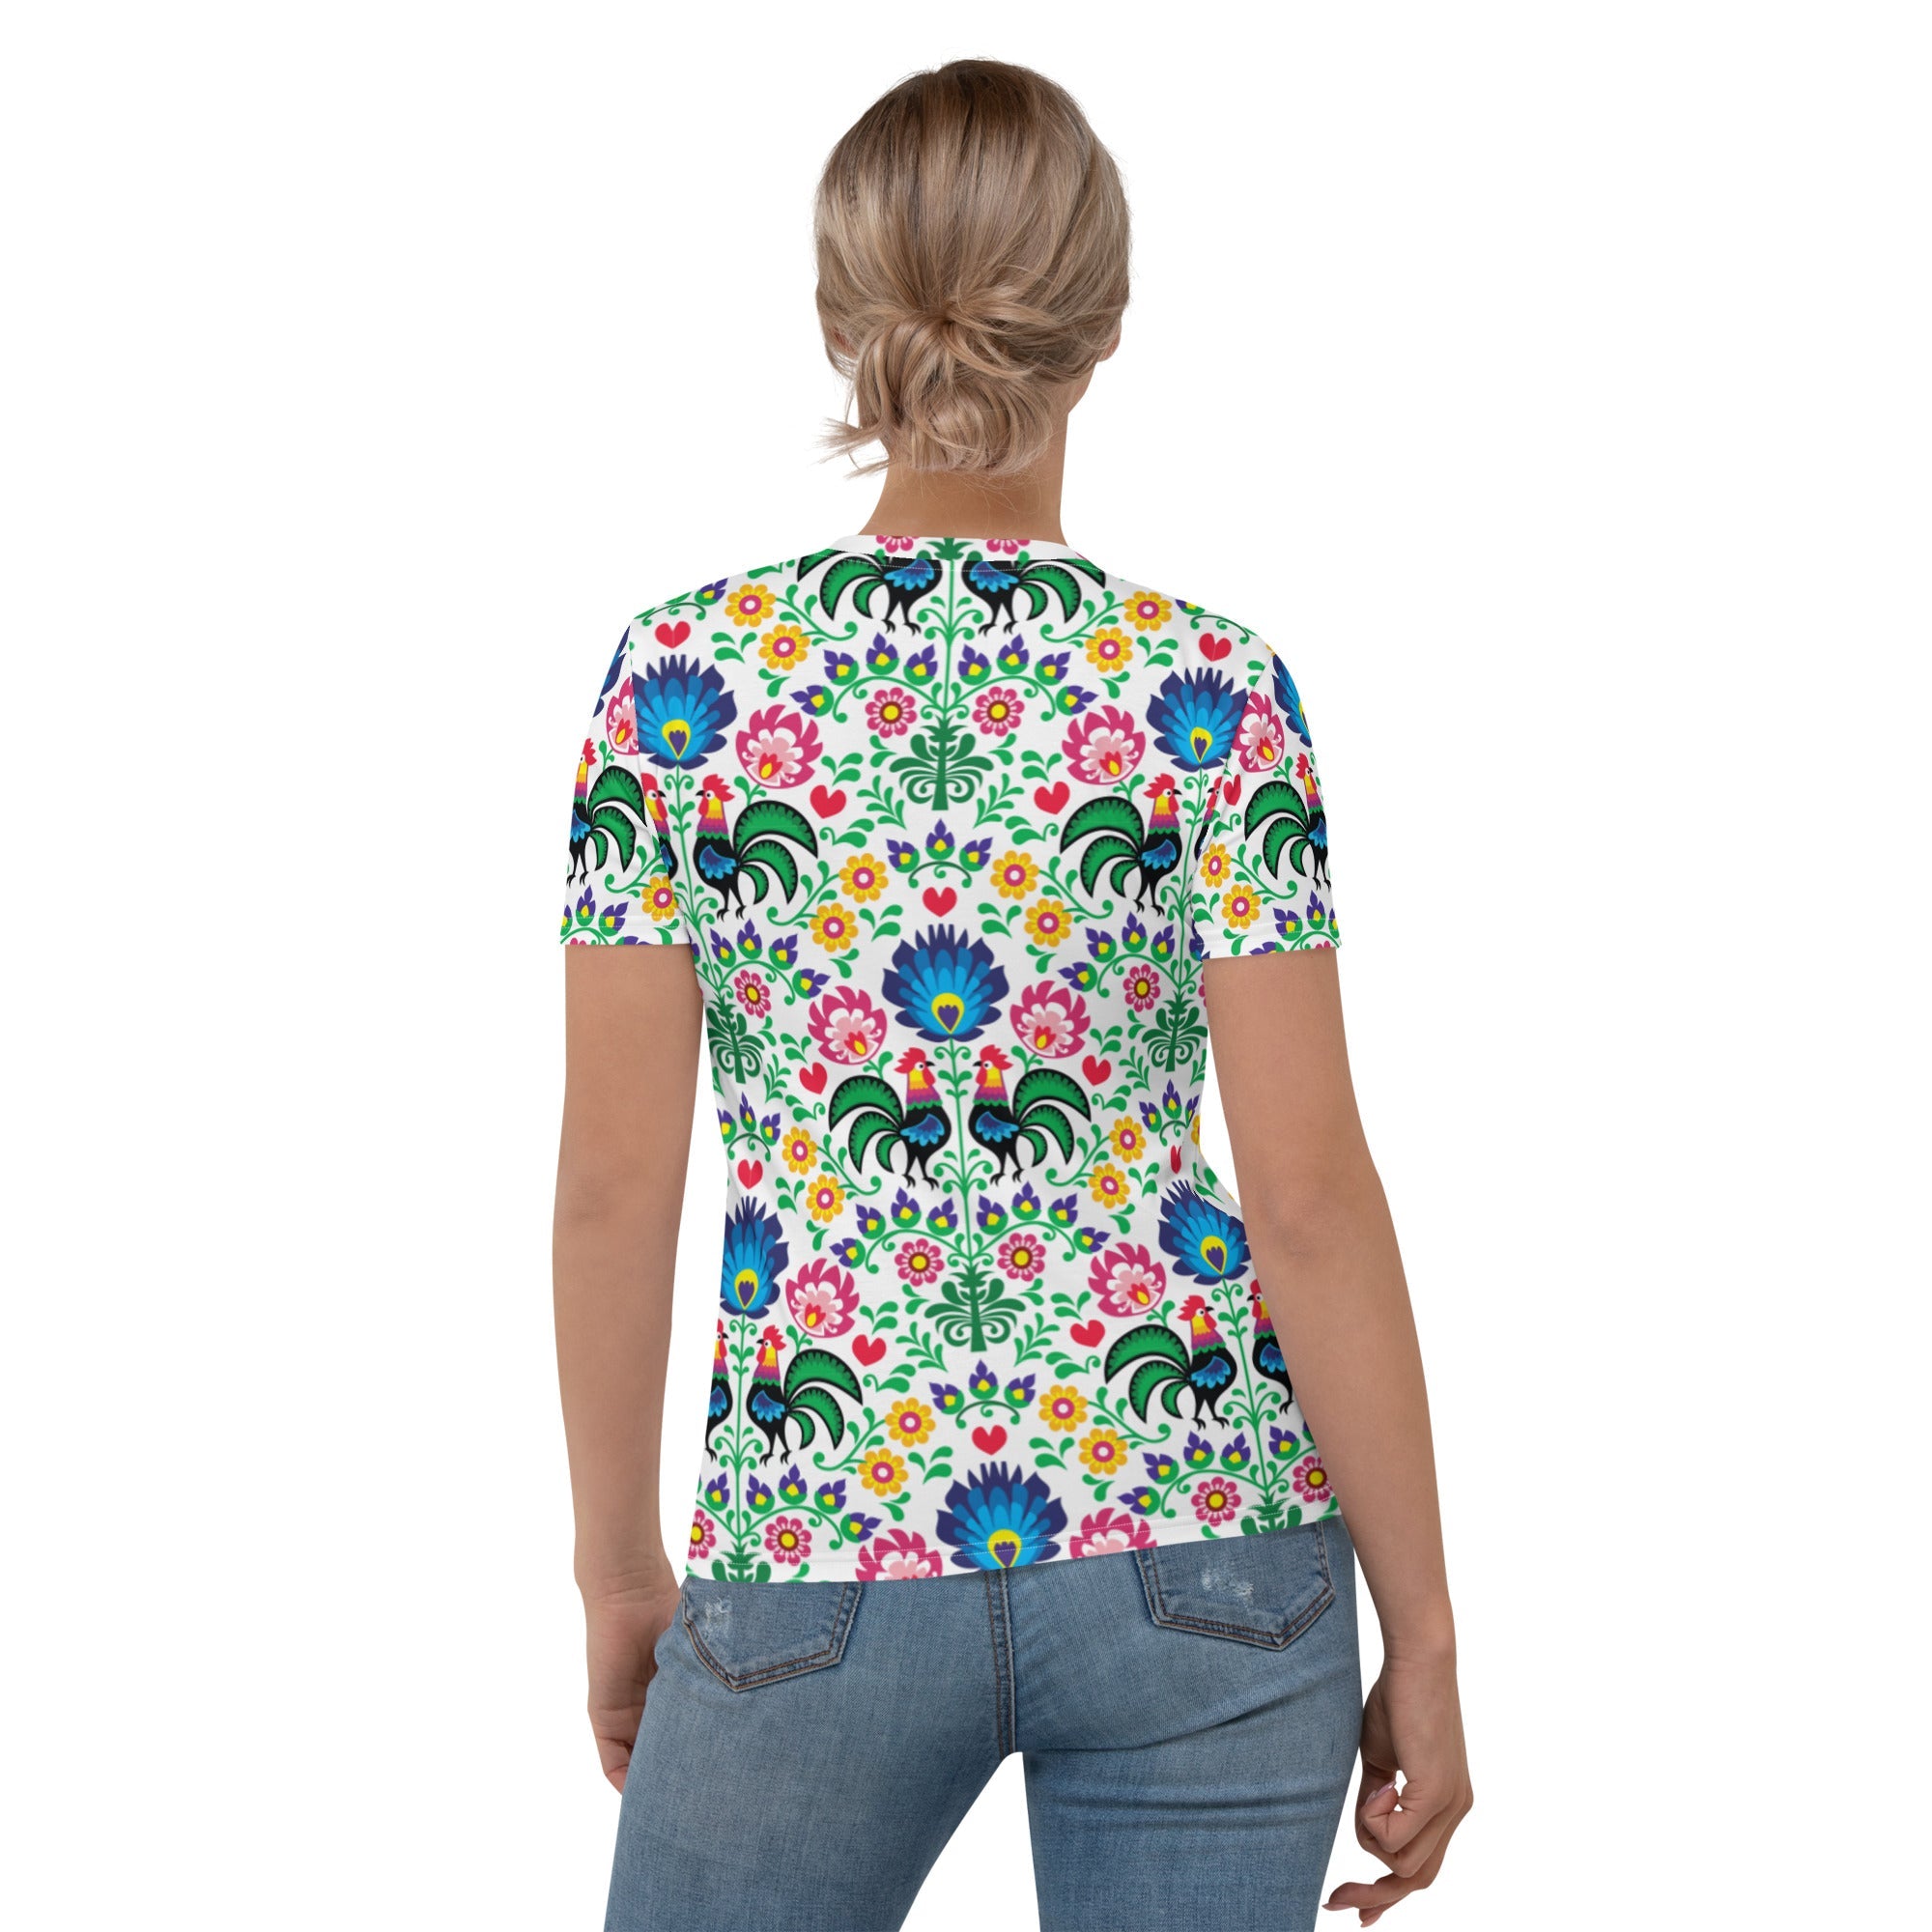 Wycinanki Rooster All Over Print Women's T-shirt  Polish Shirt Store   